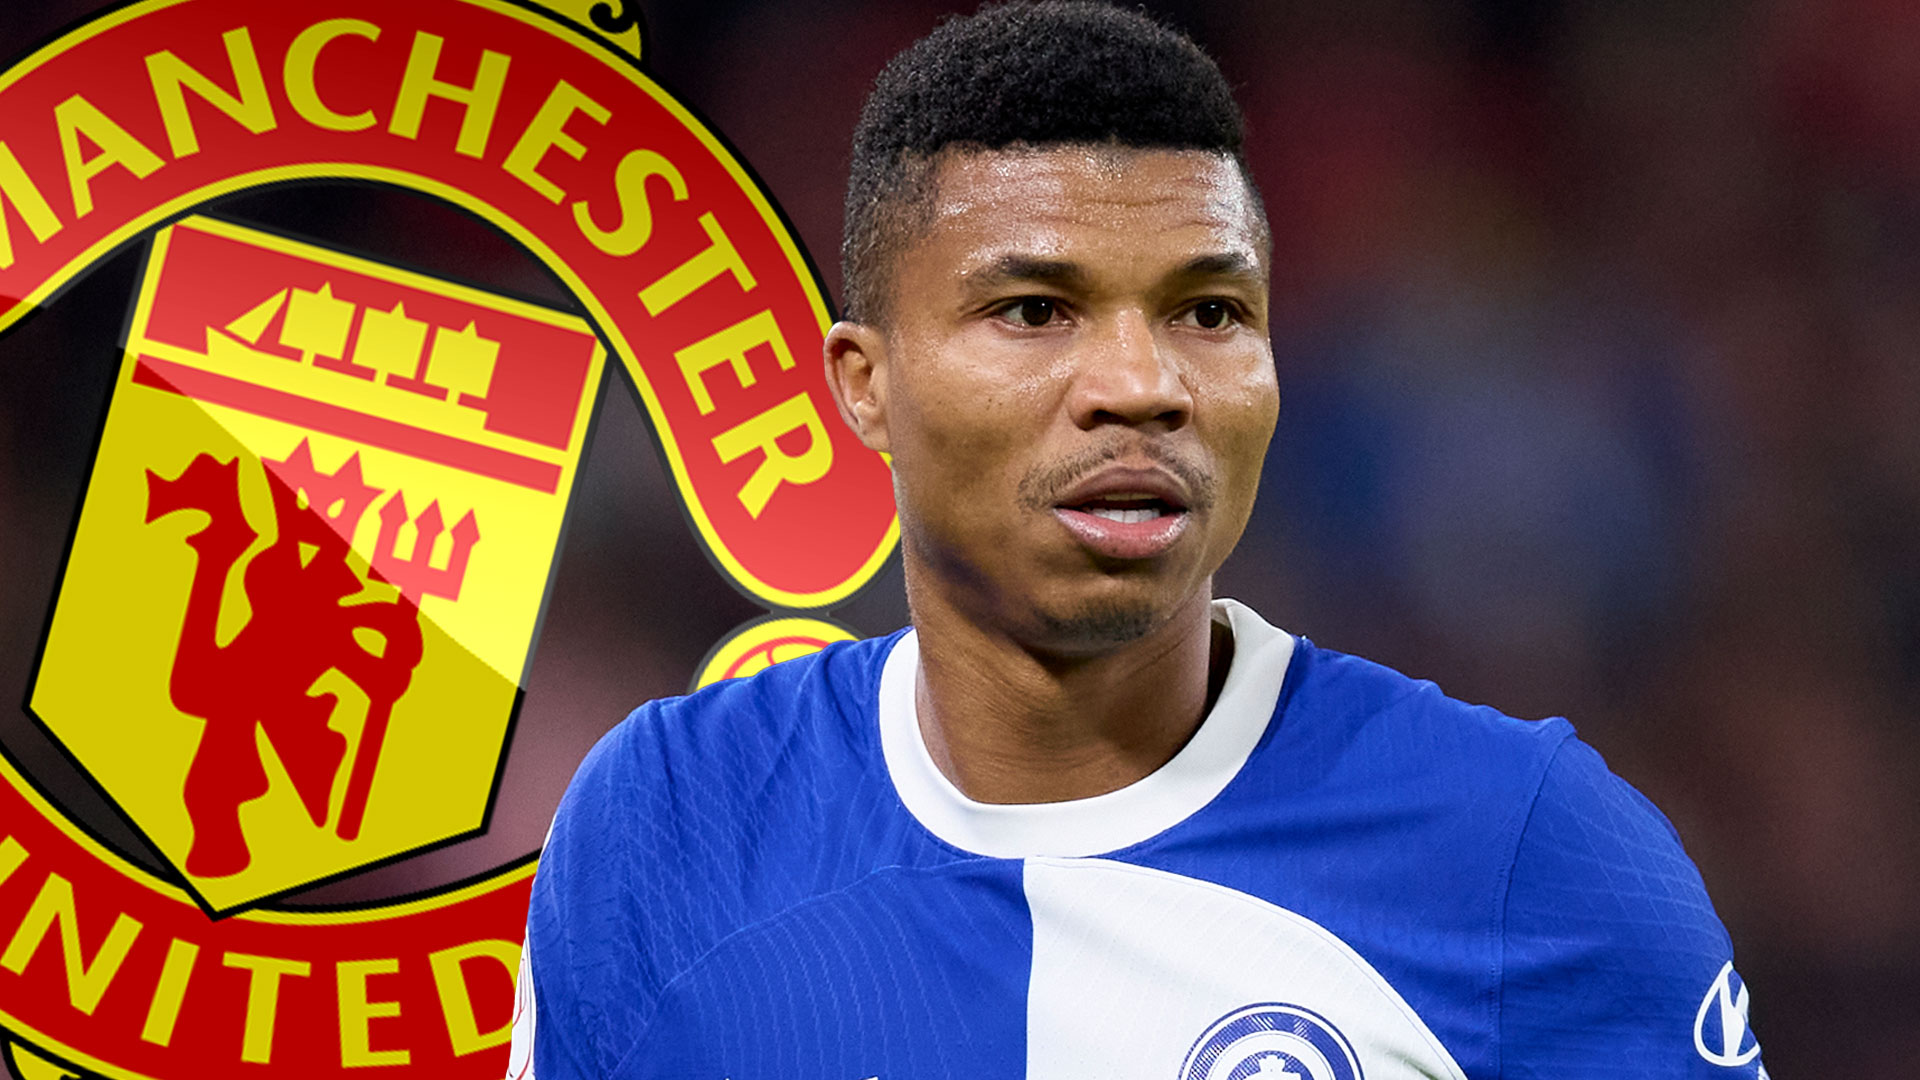 Man Utd looking to sign first Mozambique star in Premier League history but face transfer fight with Aston Villa [Video]